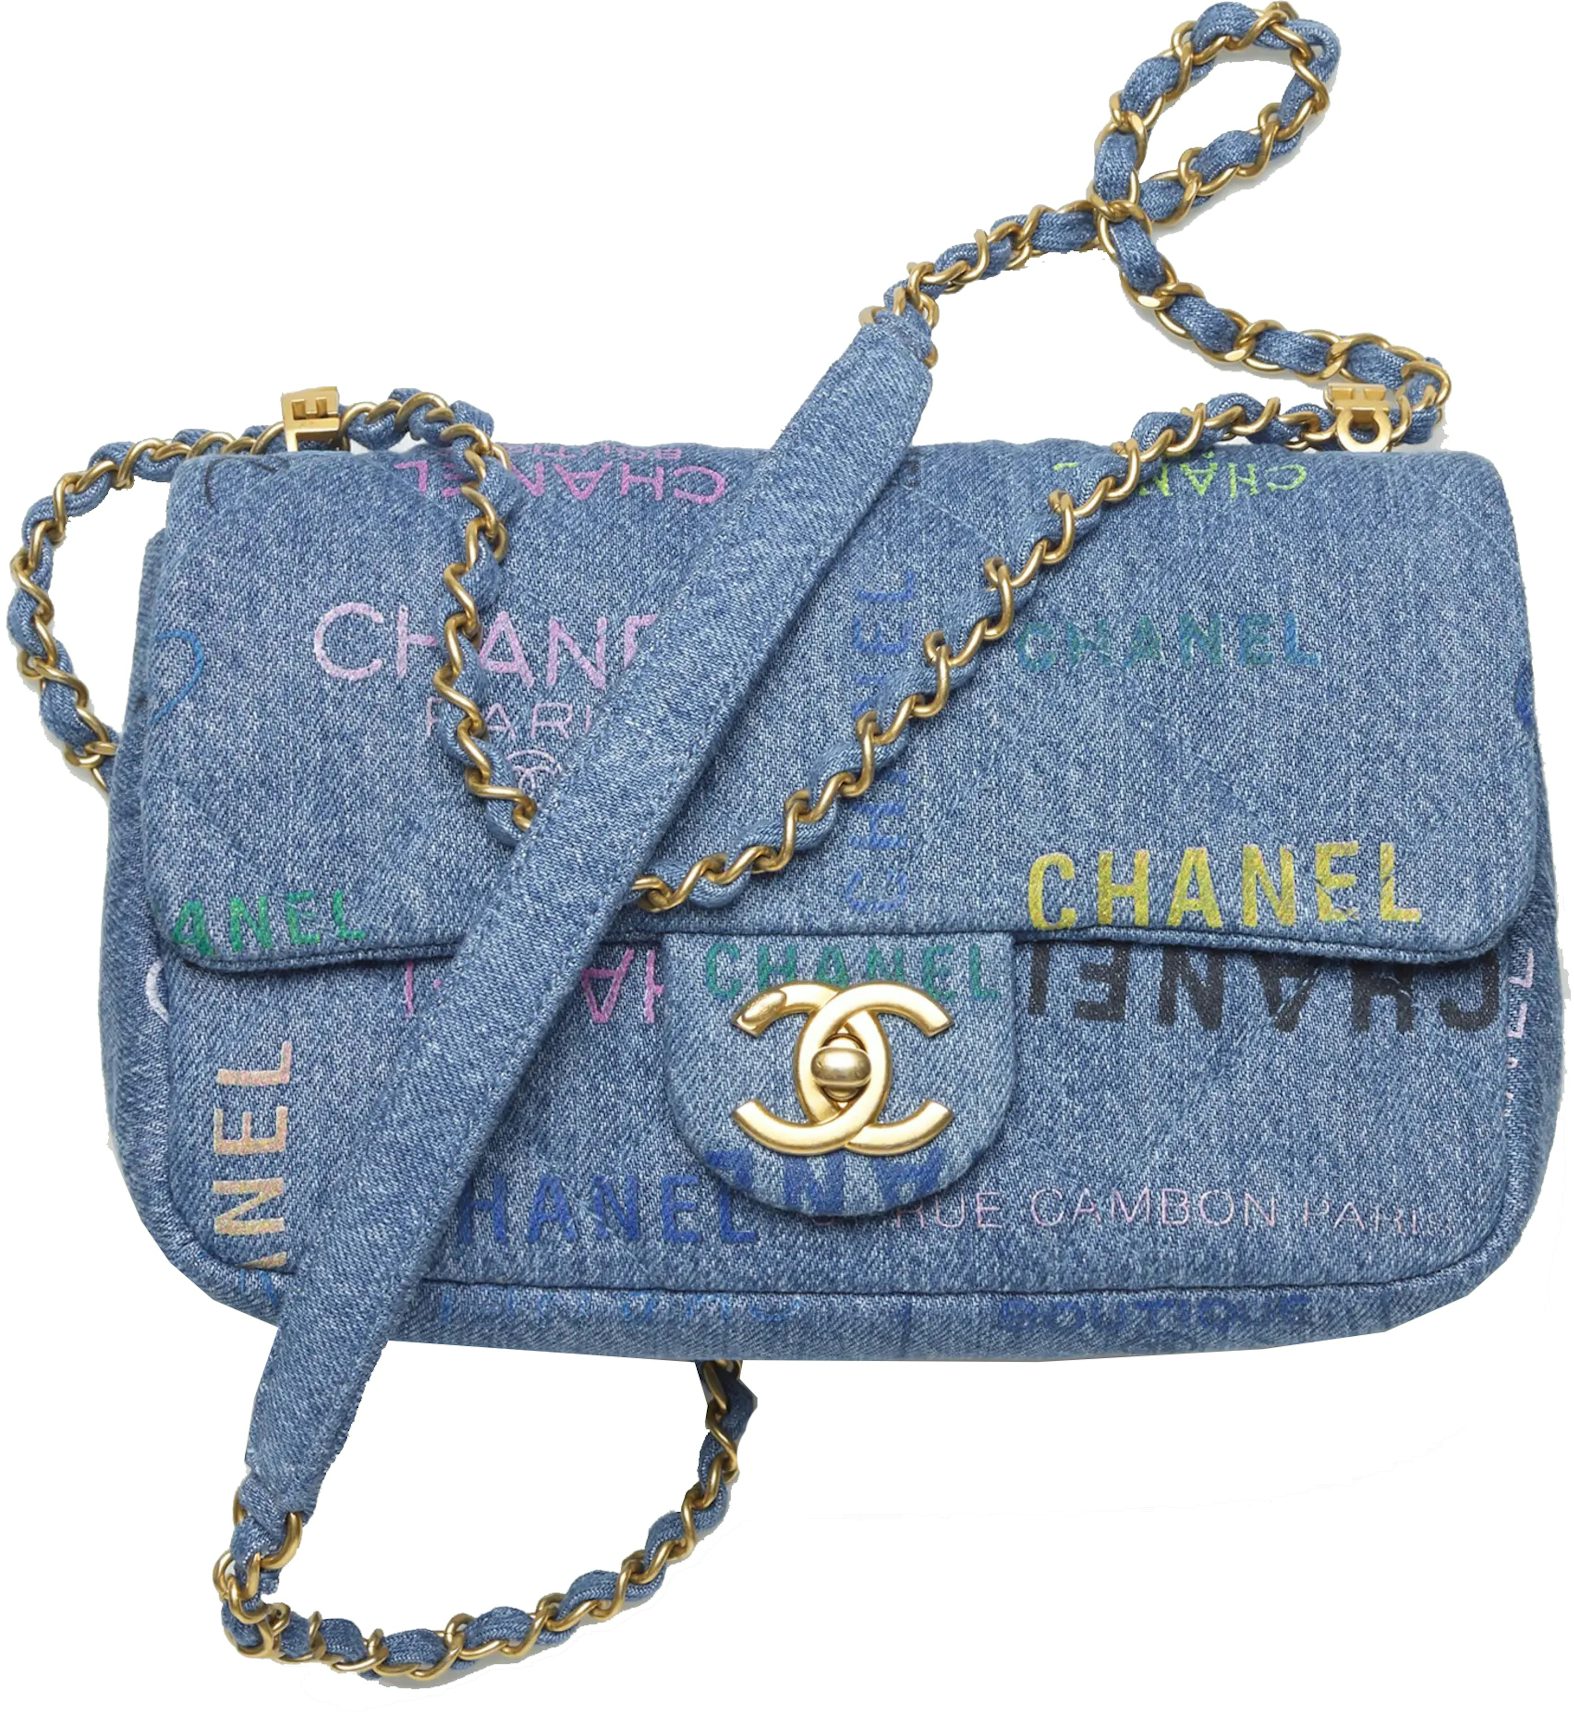 Chanel Mini Flap Bag AS3456 Black in Lambskin Leather with Gold-tone - US